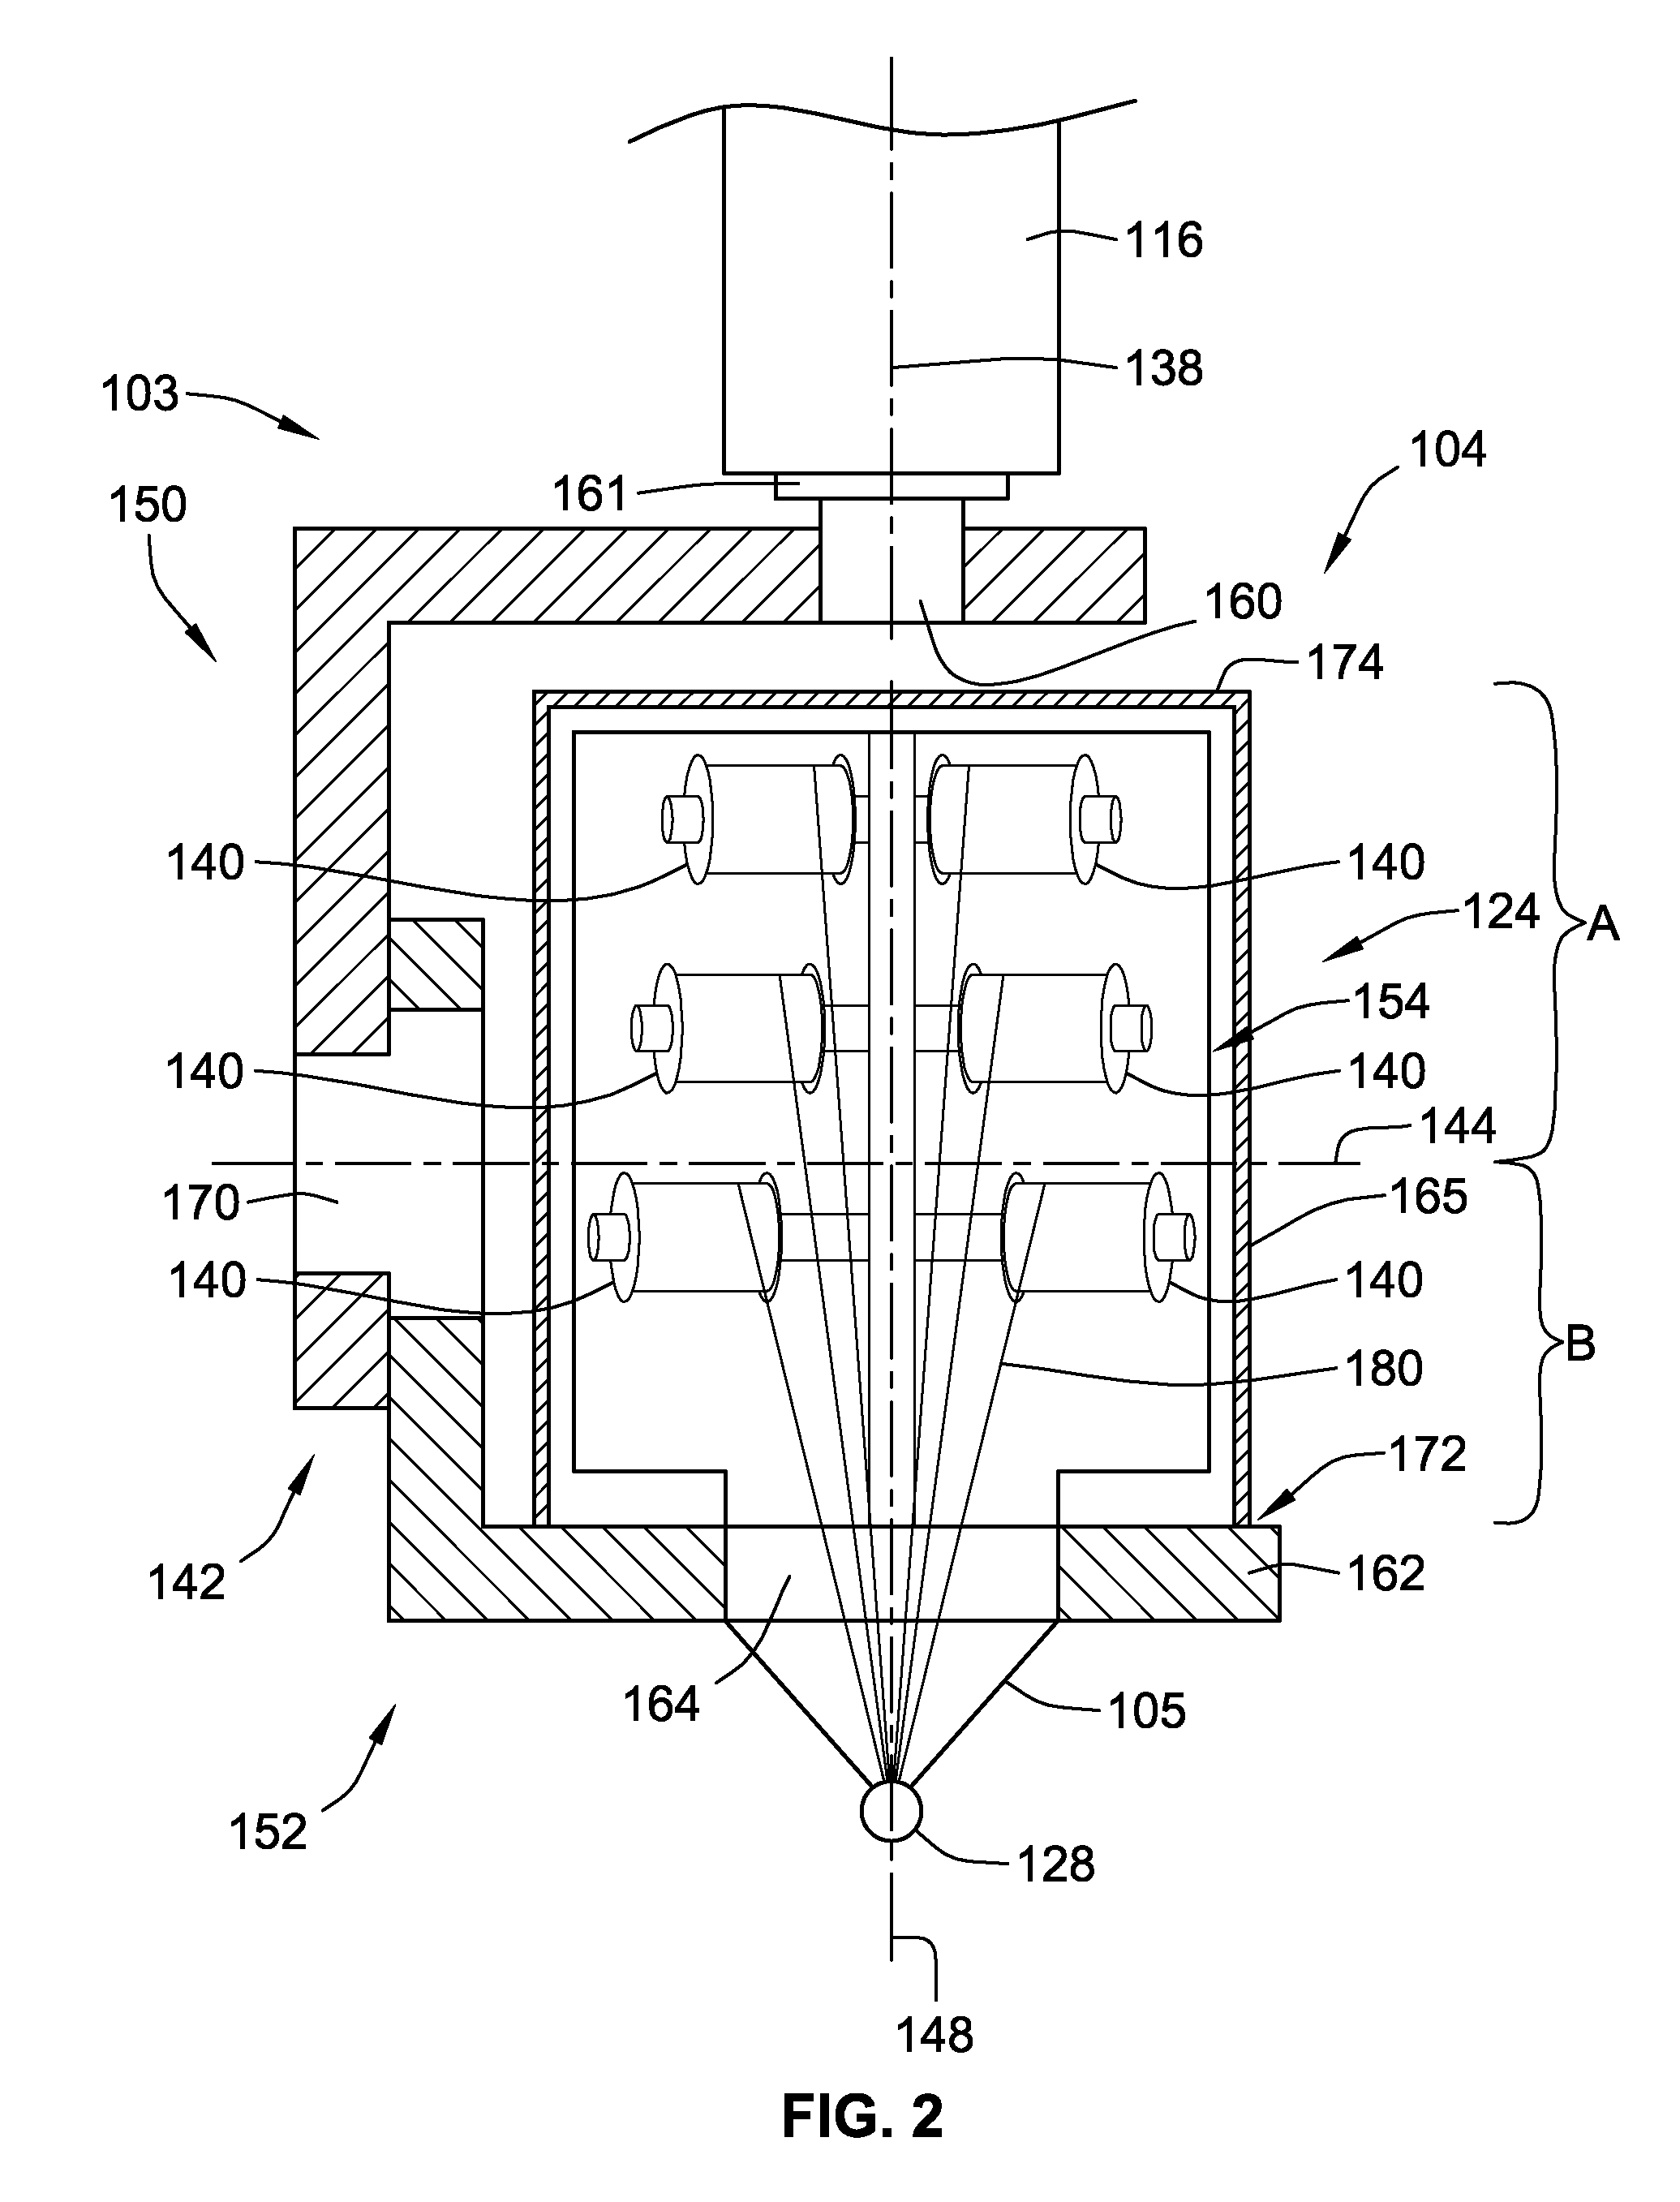 Fiber delivery apparatus and system having a creel and fiber placement head sans fiber redirect